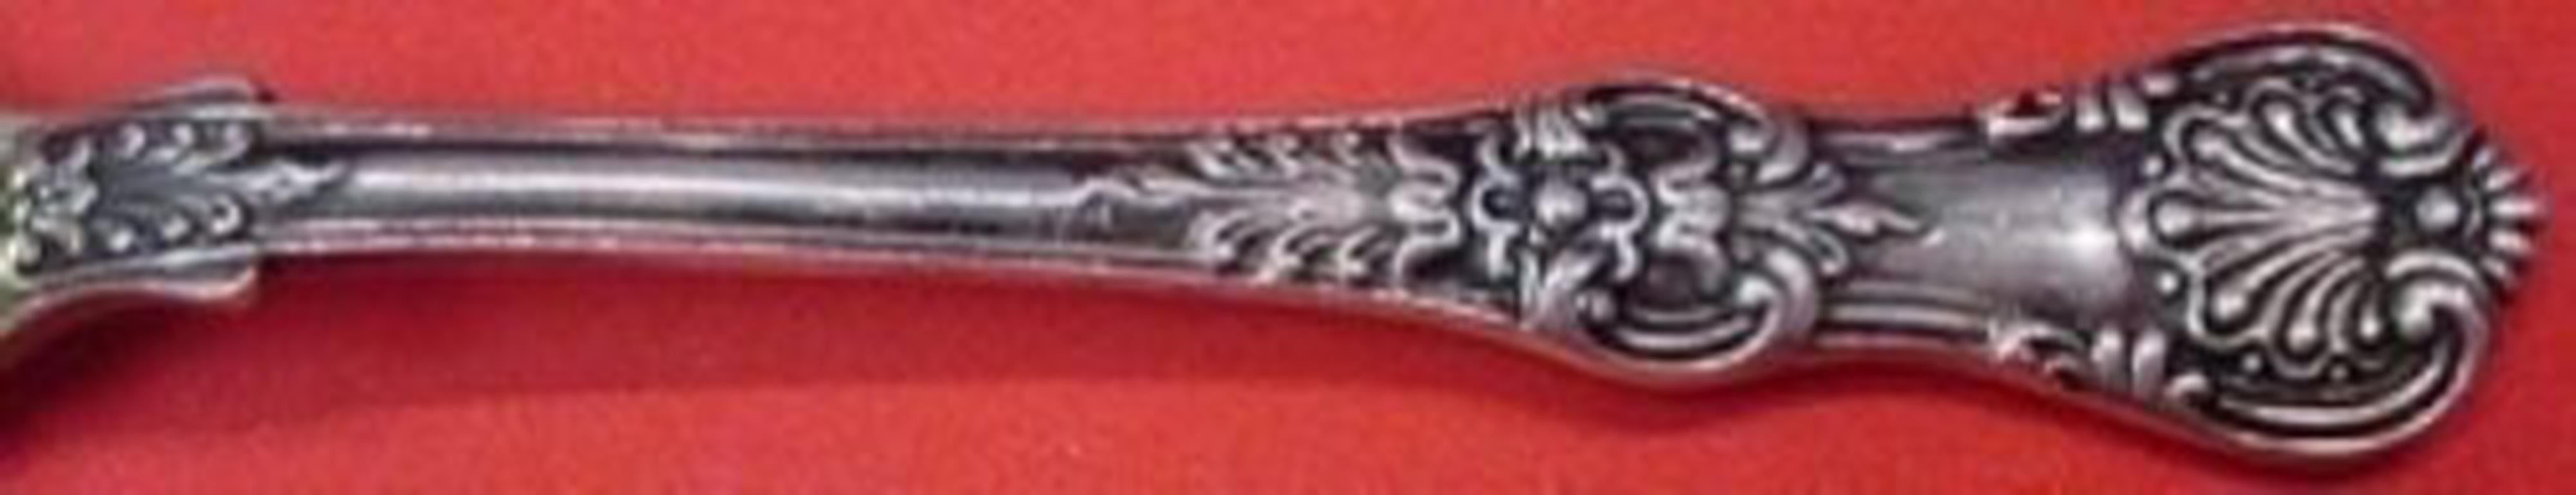 Sterling silver serving spoon, 8 1/2